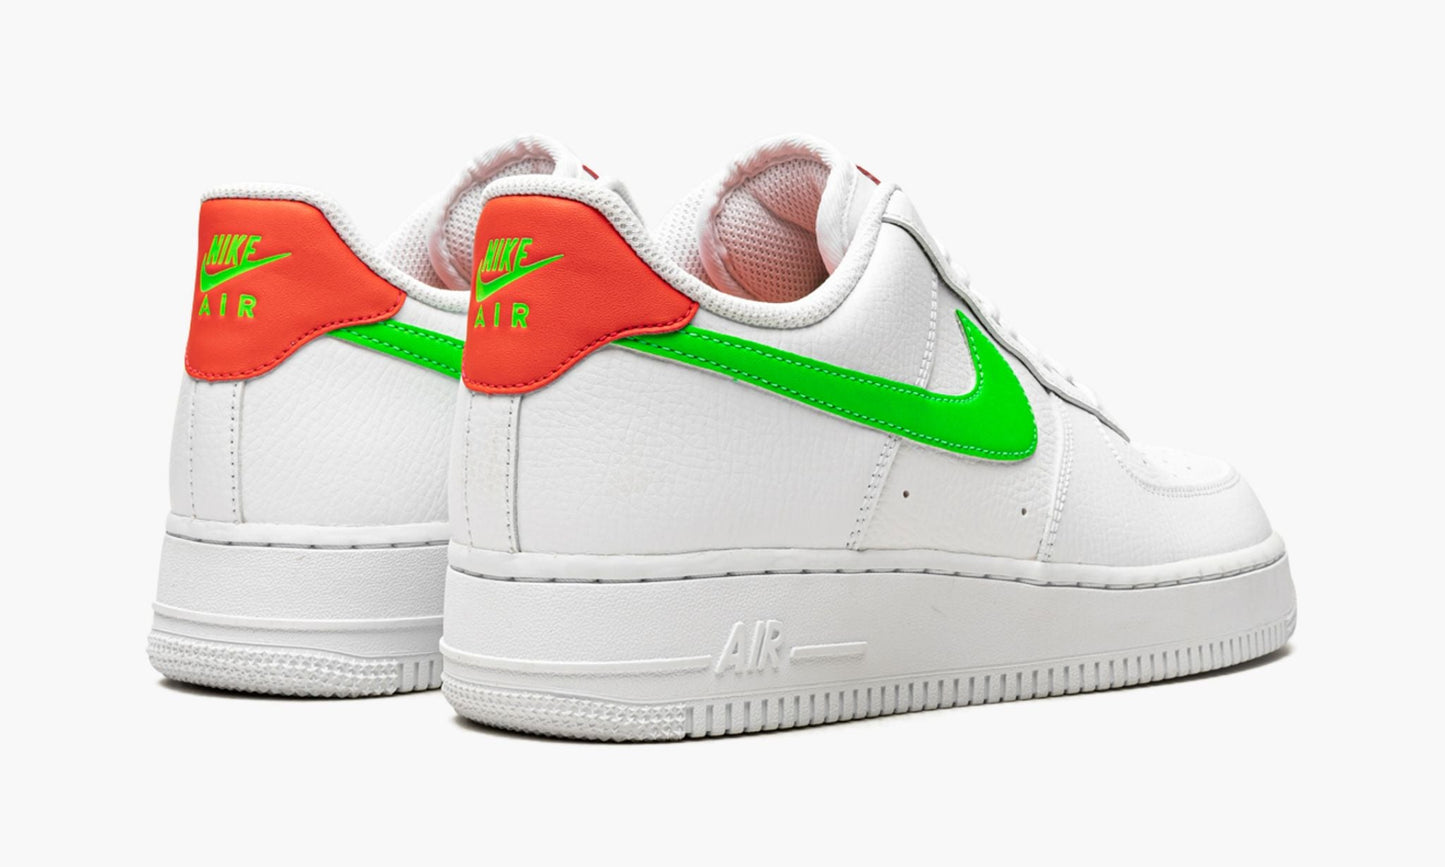 Air Force 1 Low "Watermelon"